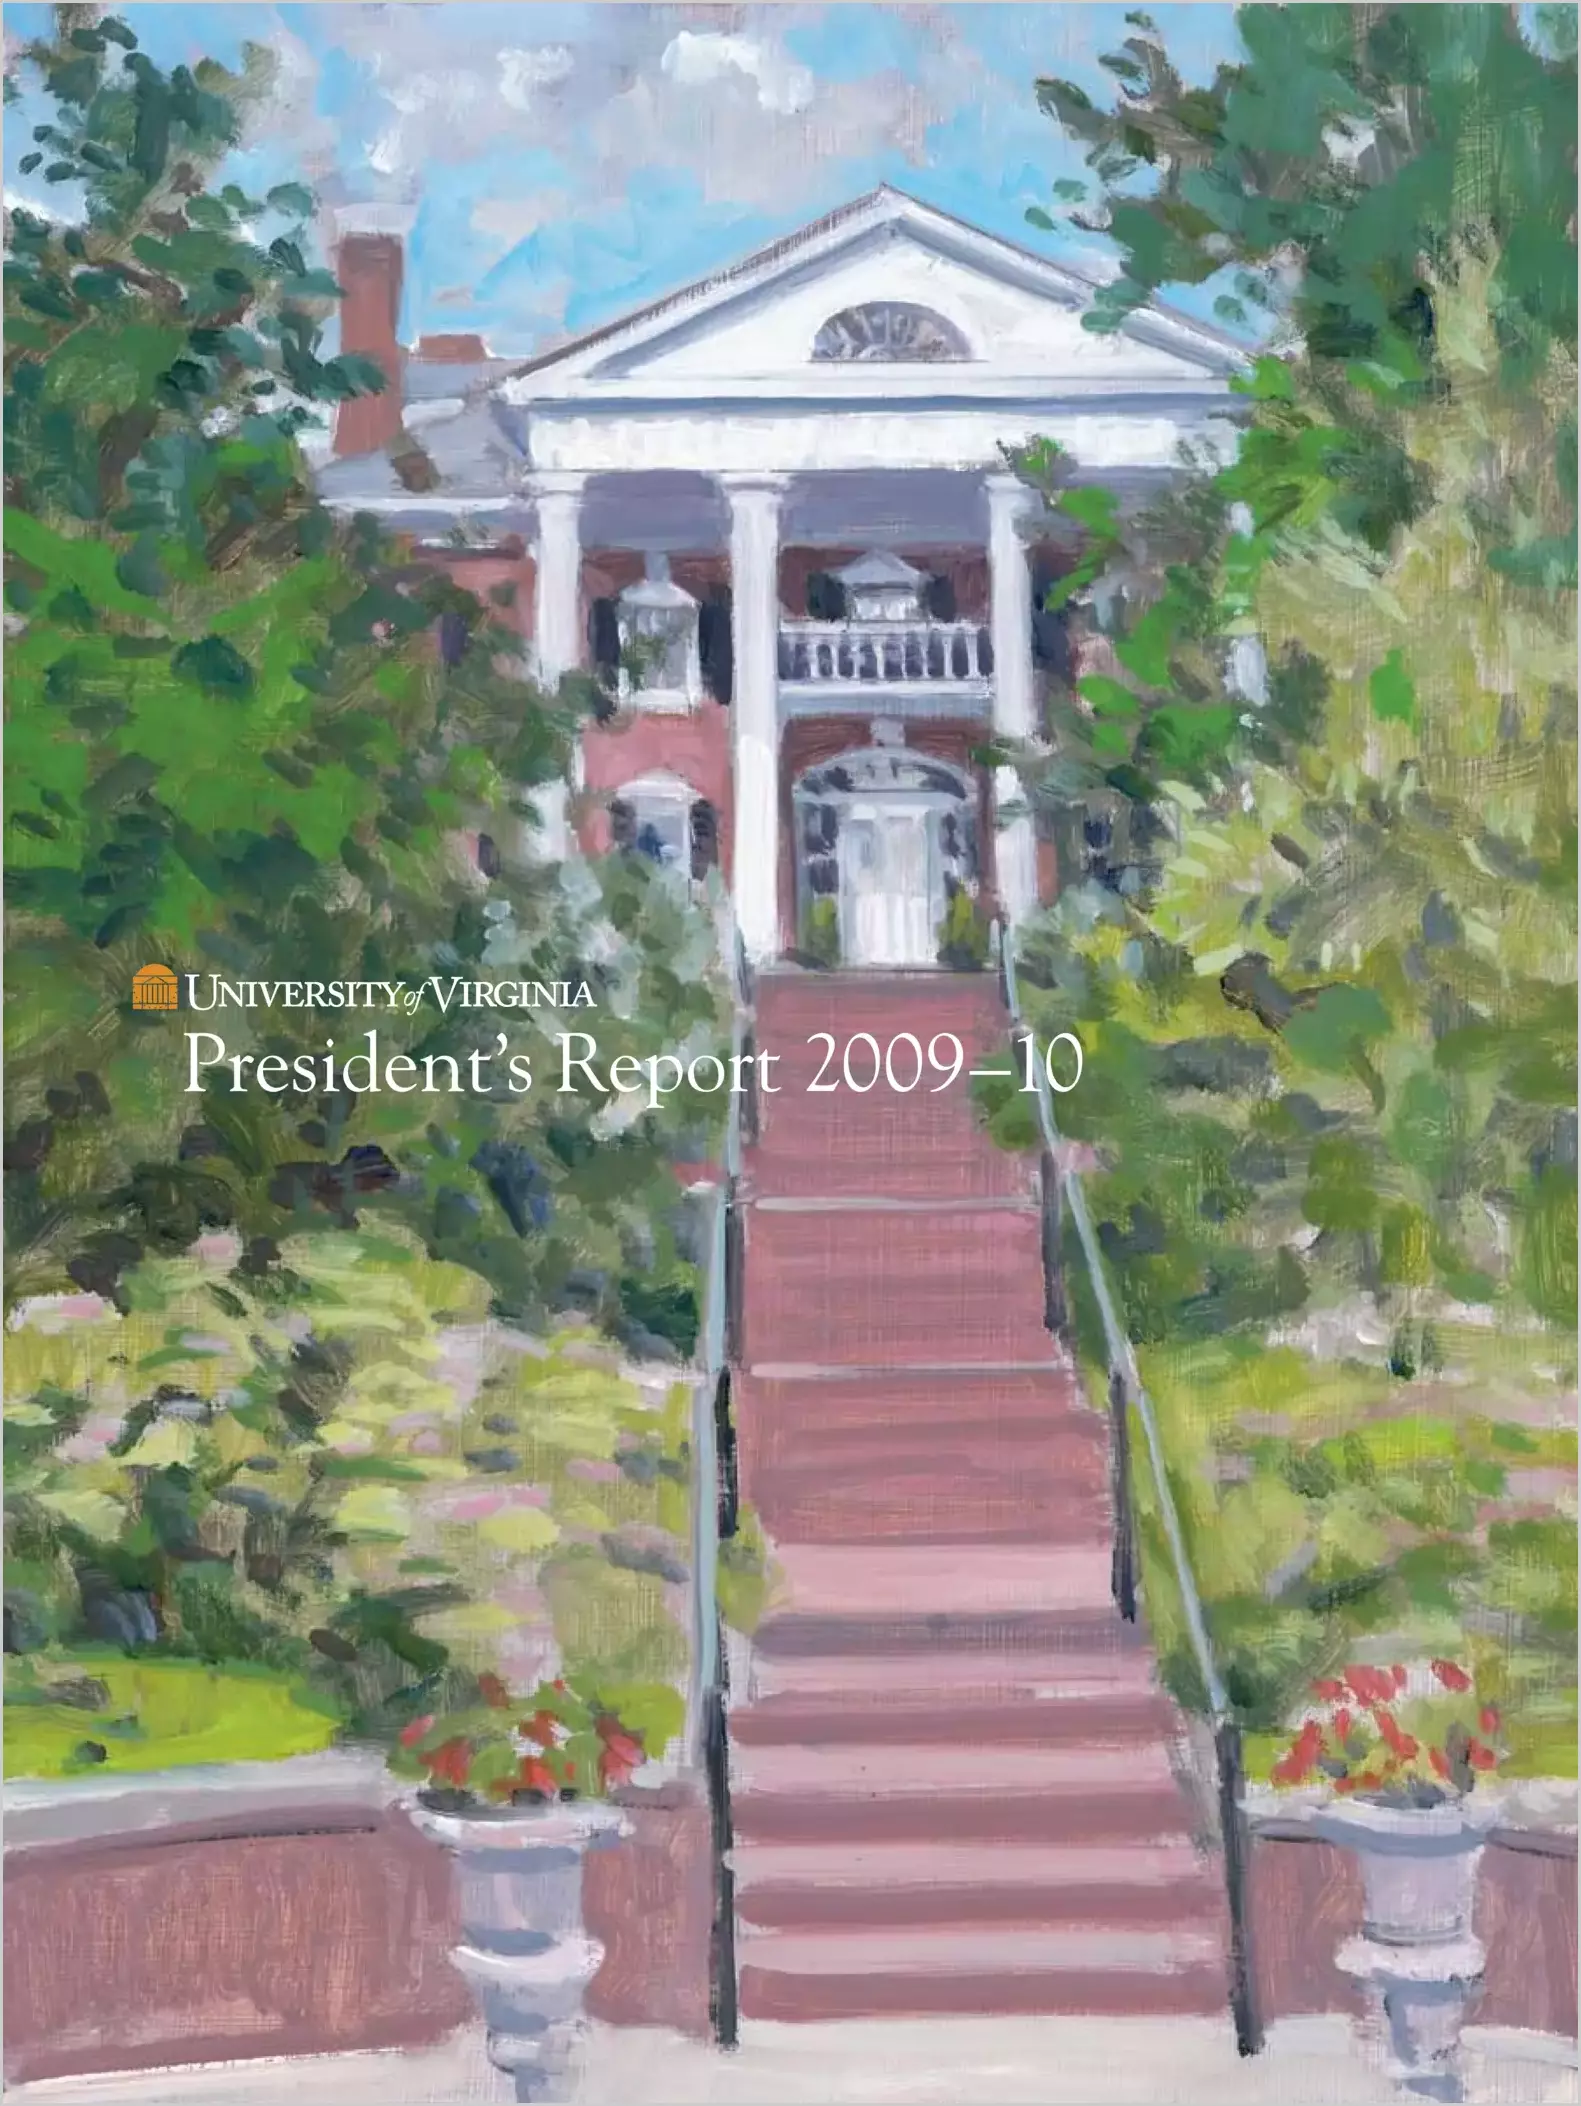 University of Virginia Financial Statements Report for the year ended June 30, 2010